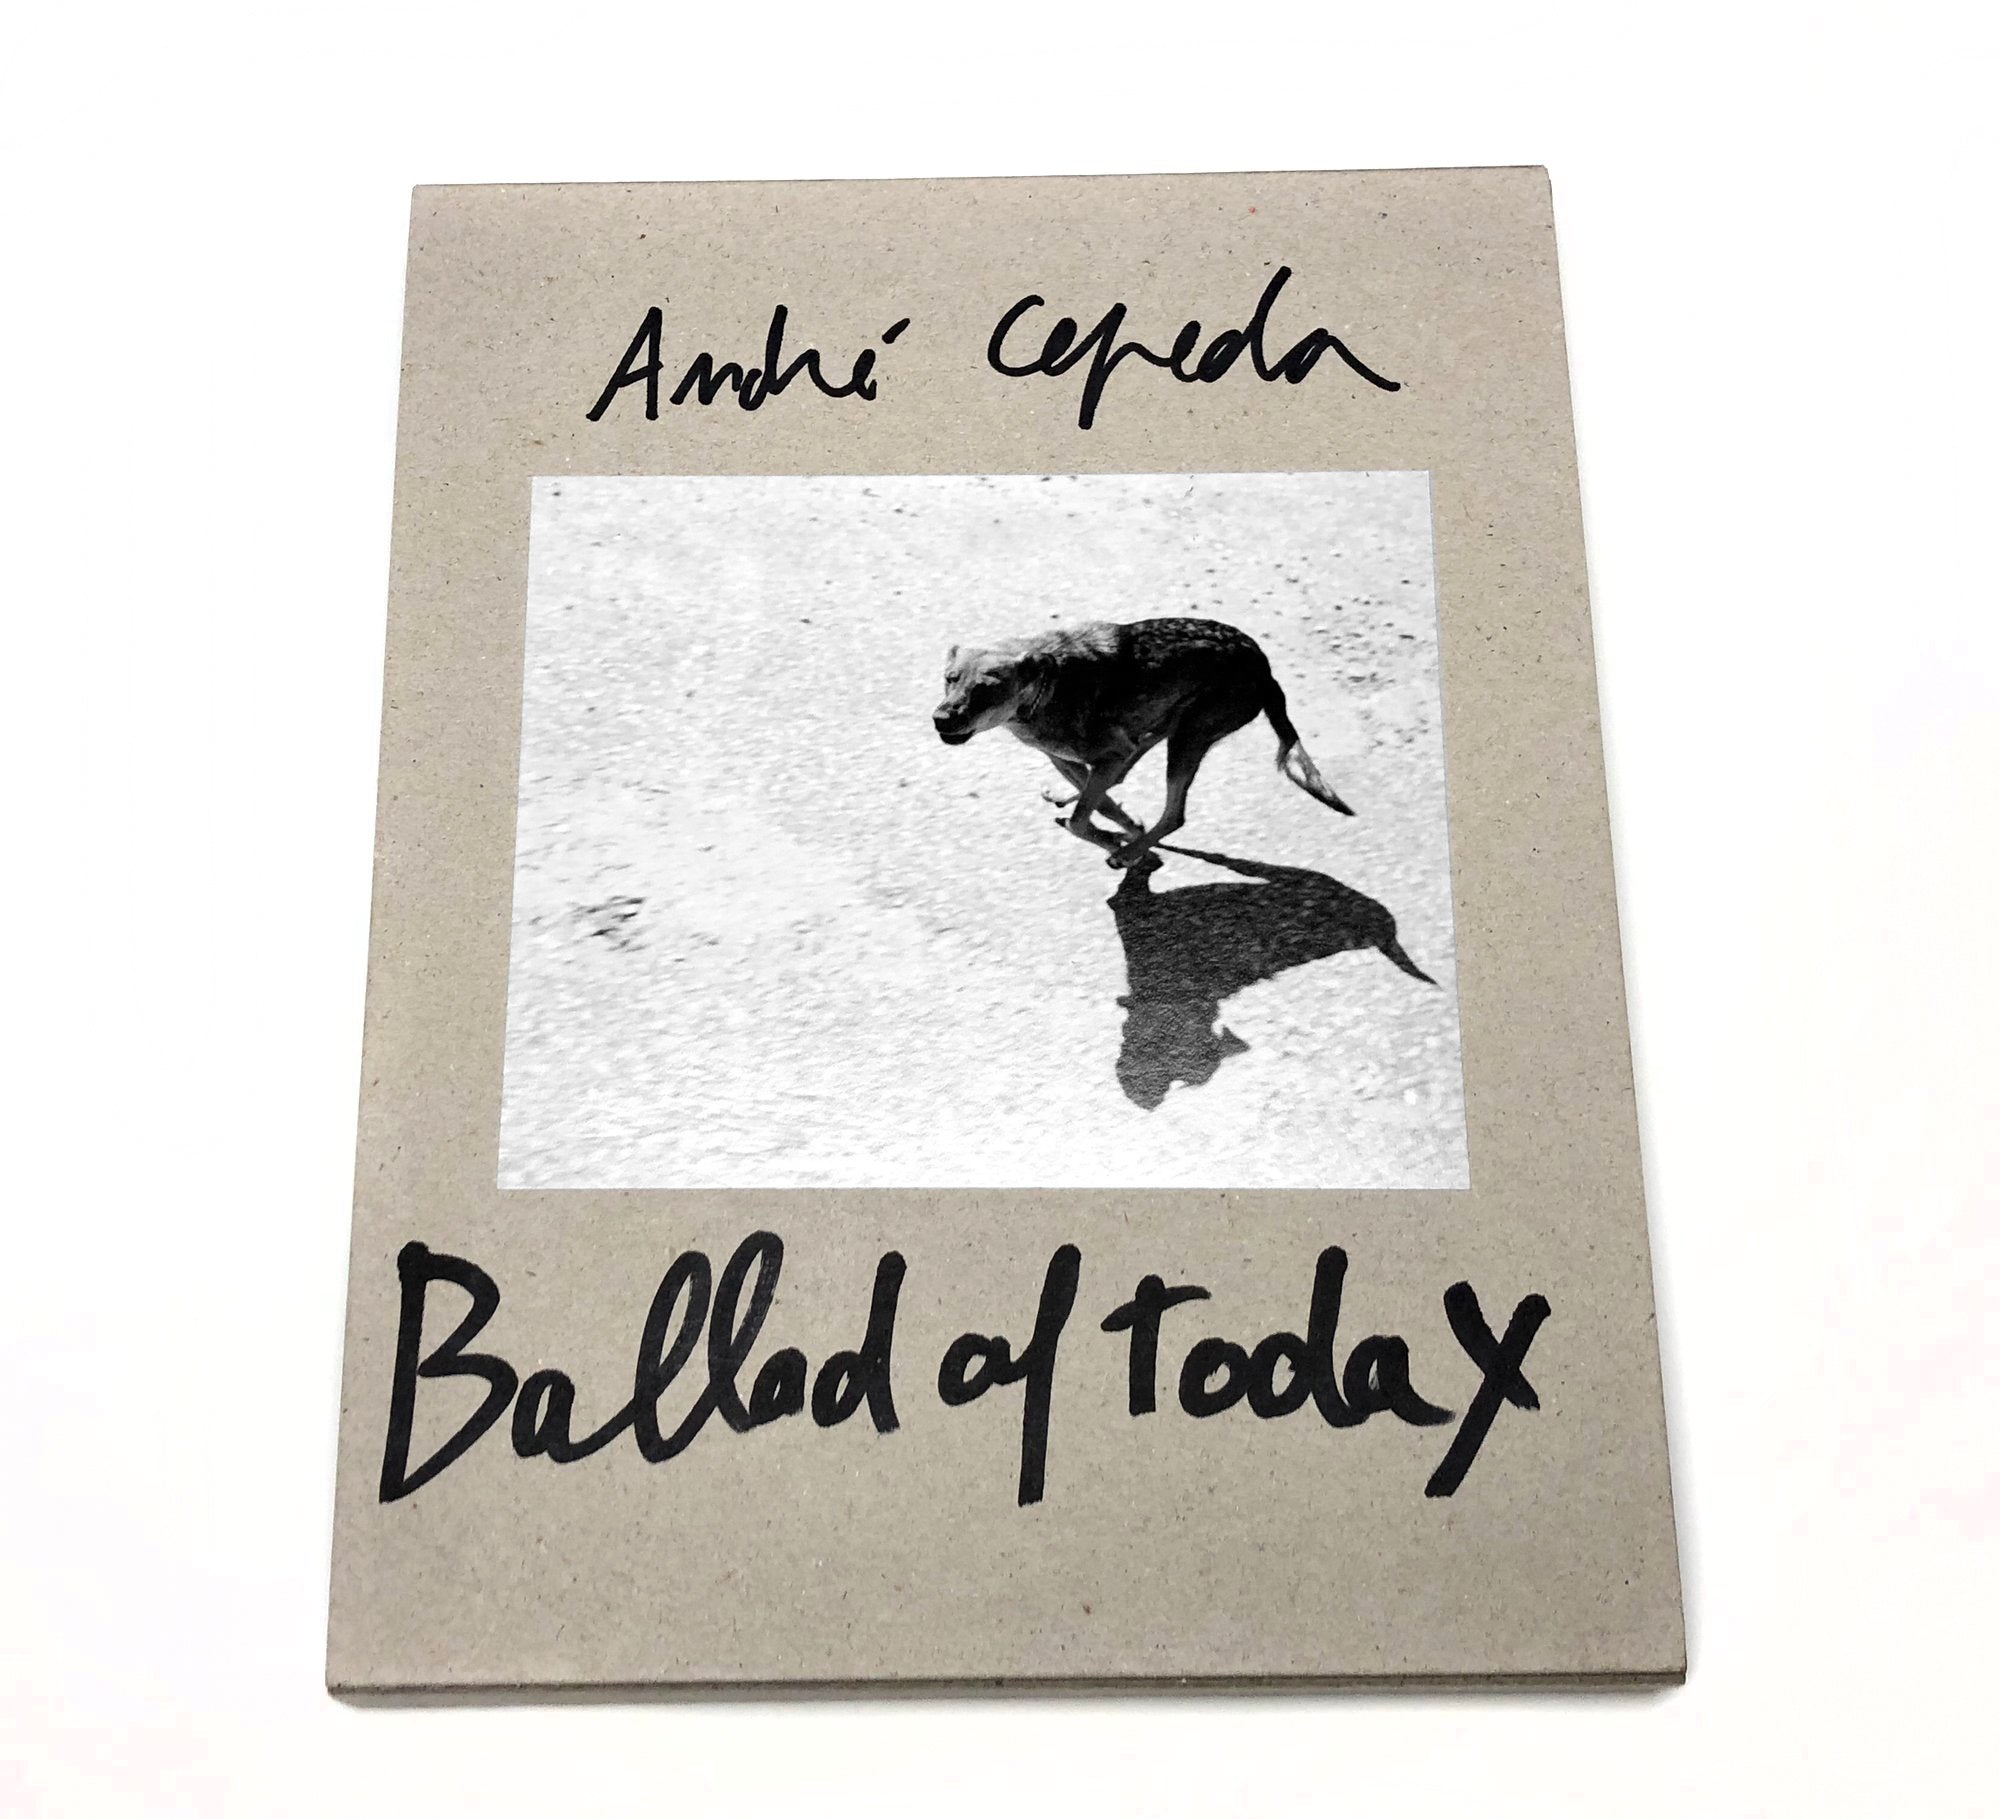 BALLAD OF TODAY by André Cepeda  Special Edition